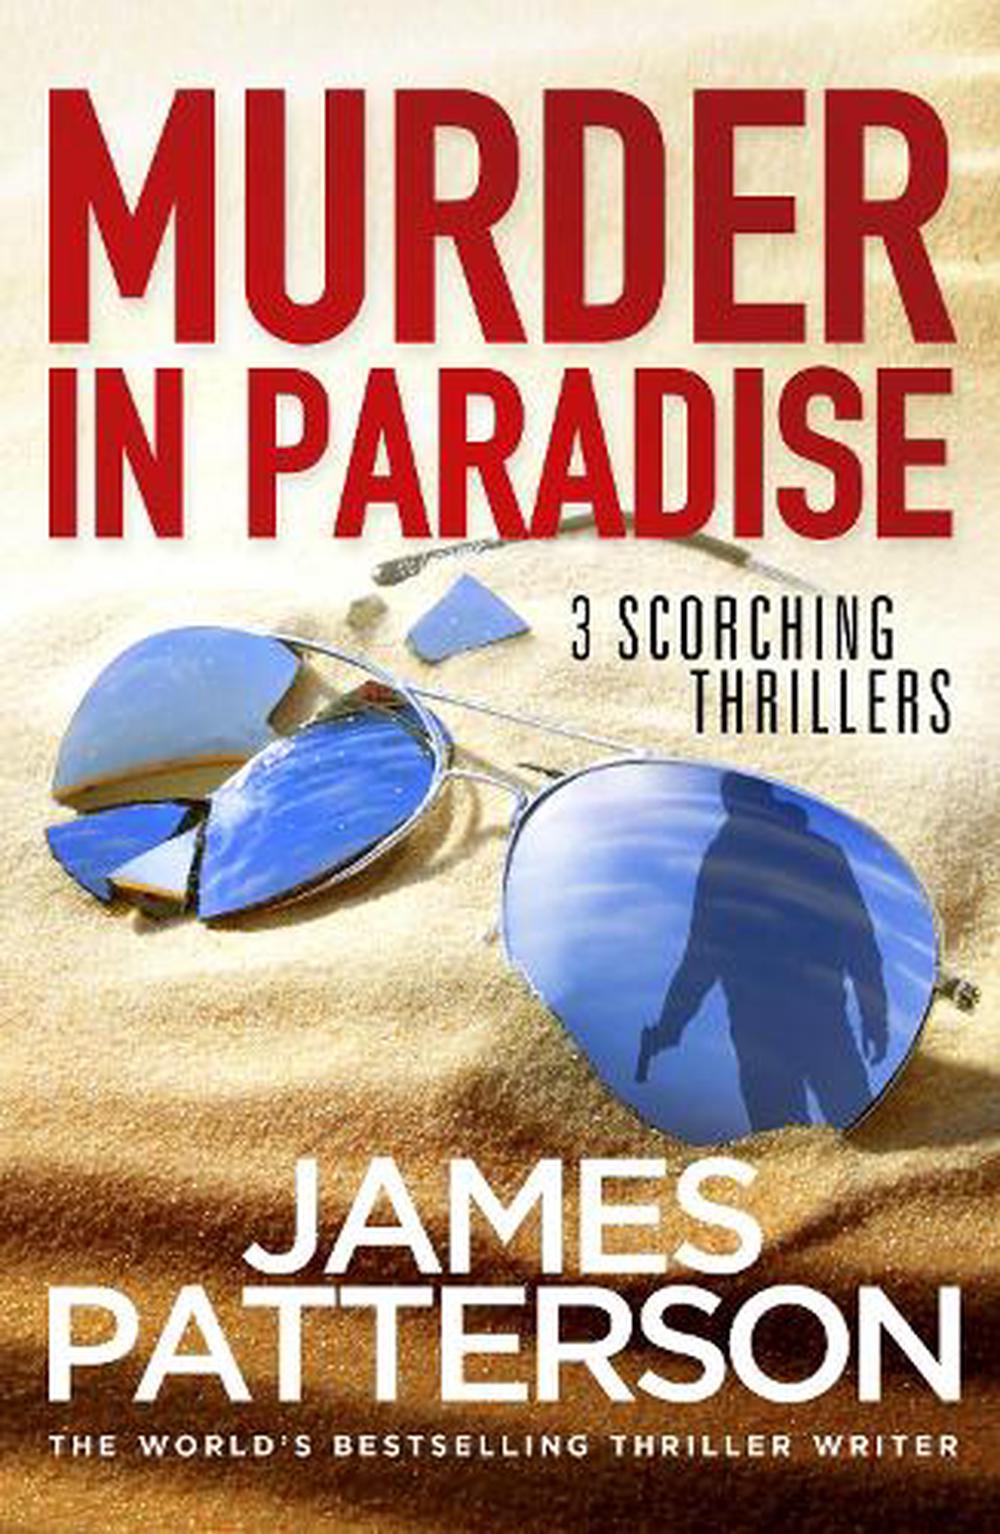 Murder in Paradise by James Patterson, Paperback, 9781787461727 | Buy ...